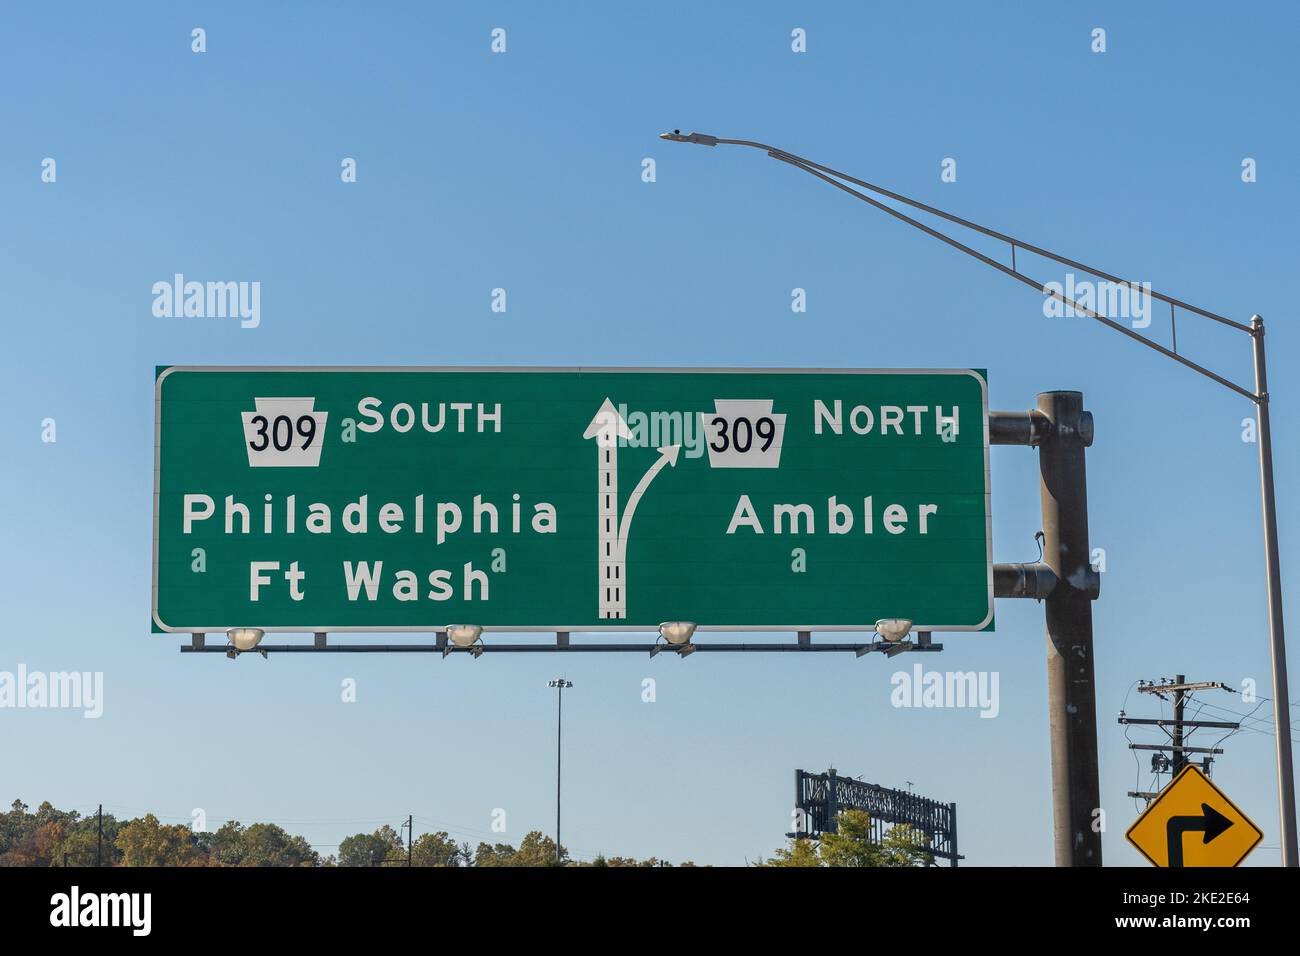 Exiting the Pennsylvania Turnpike at Route 309. Sign for South 309 toward Philadelphia and Fort Washington and North 309 toward Ambler. Stock Photo